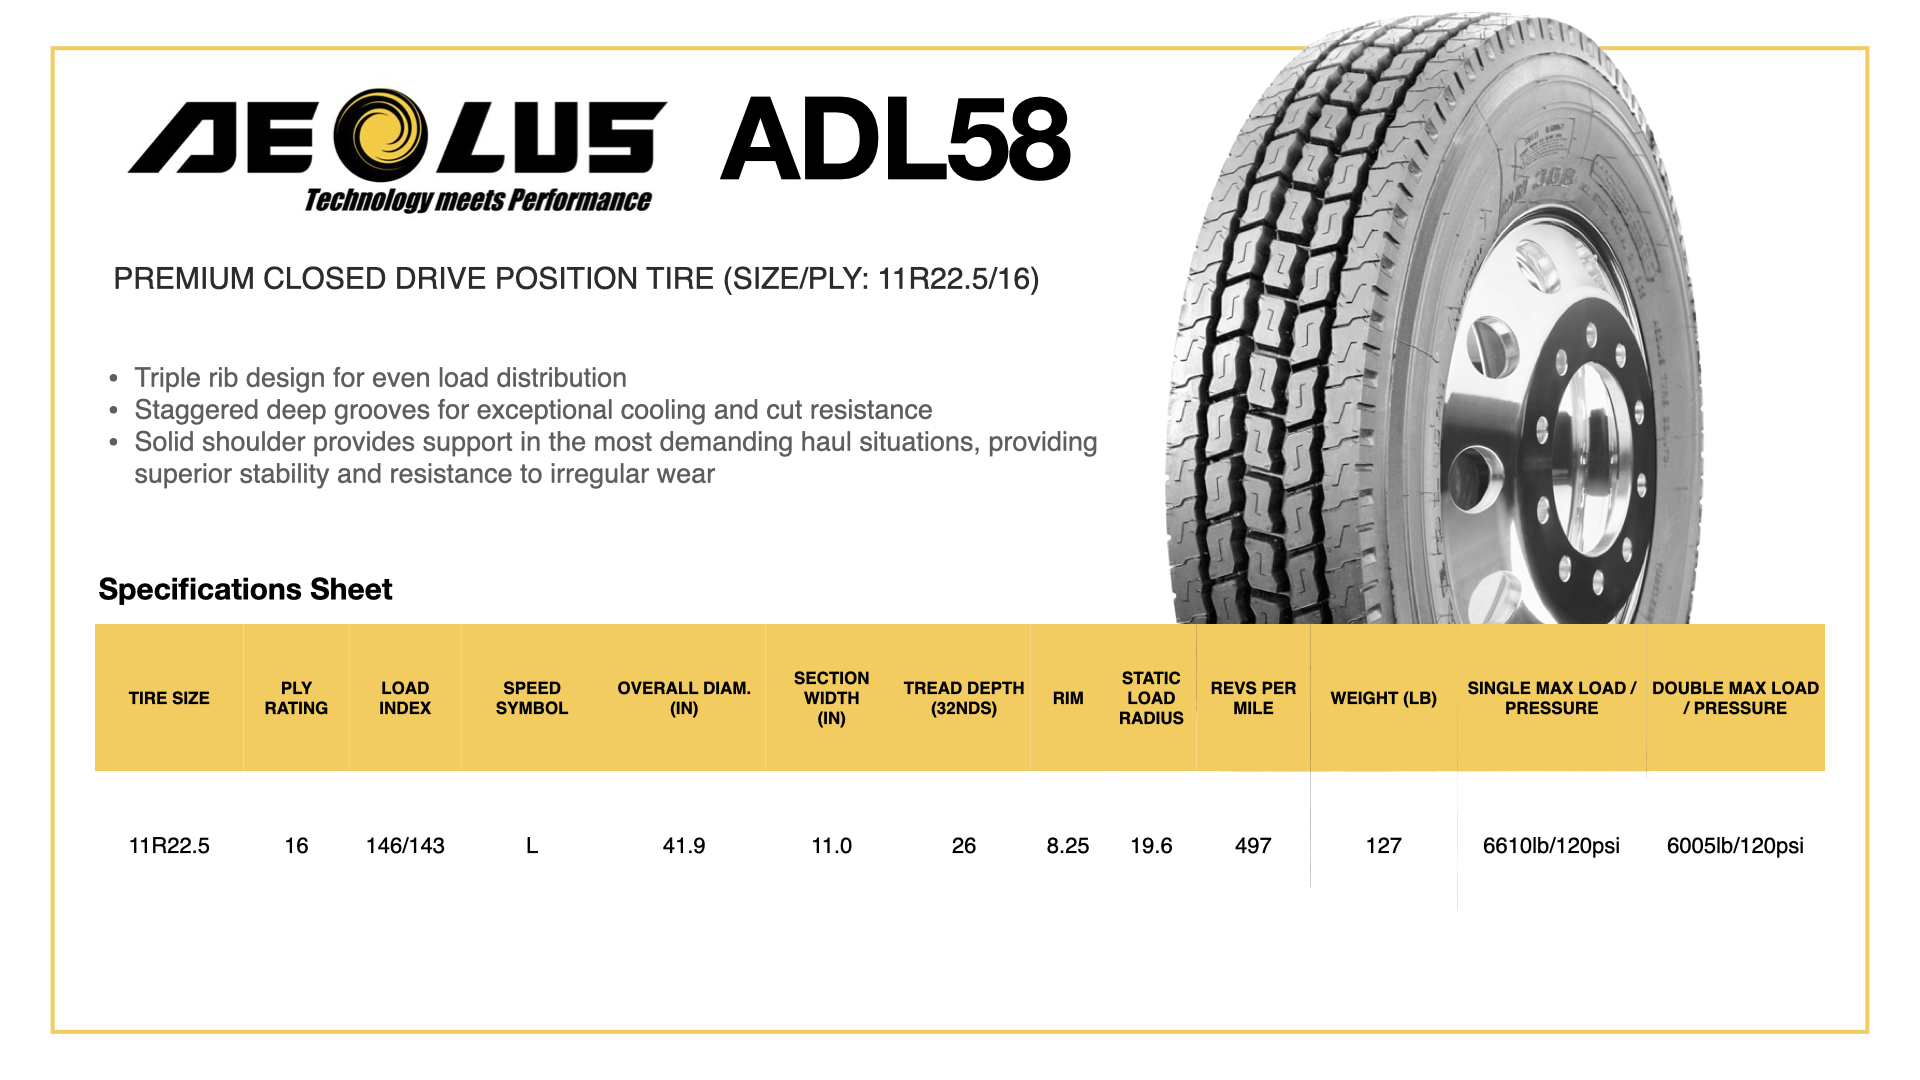 Aeolus ADL58 11R22.5 Specifications Sheet